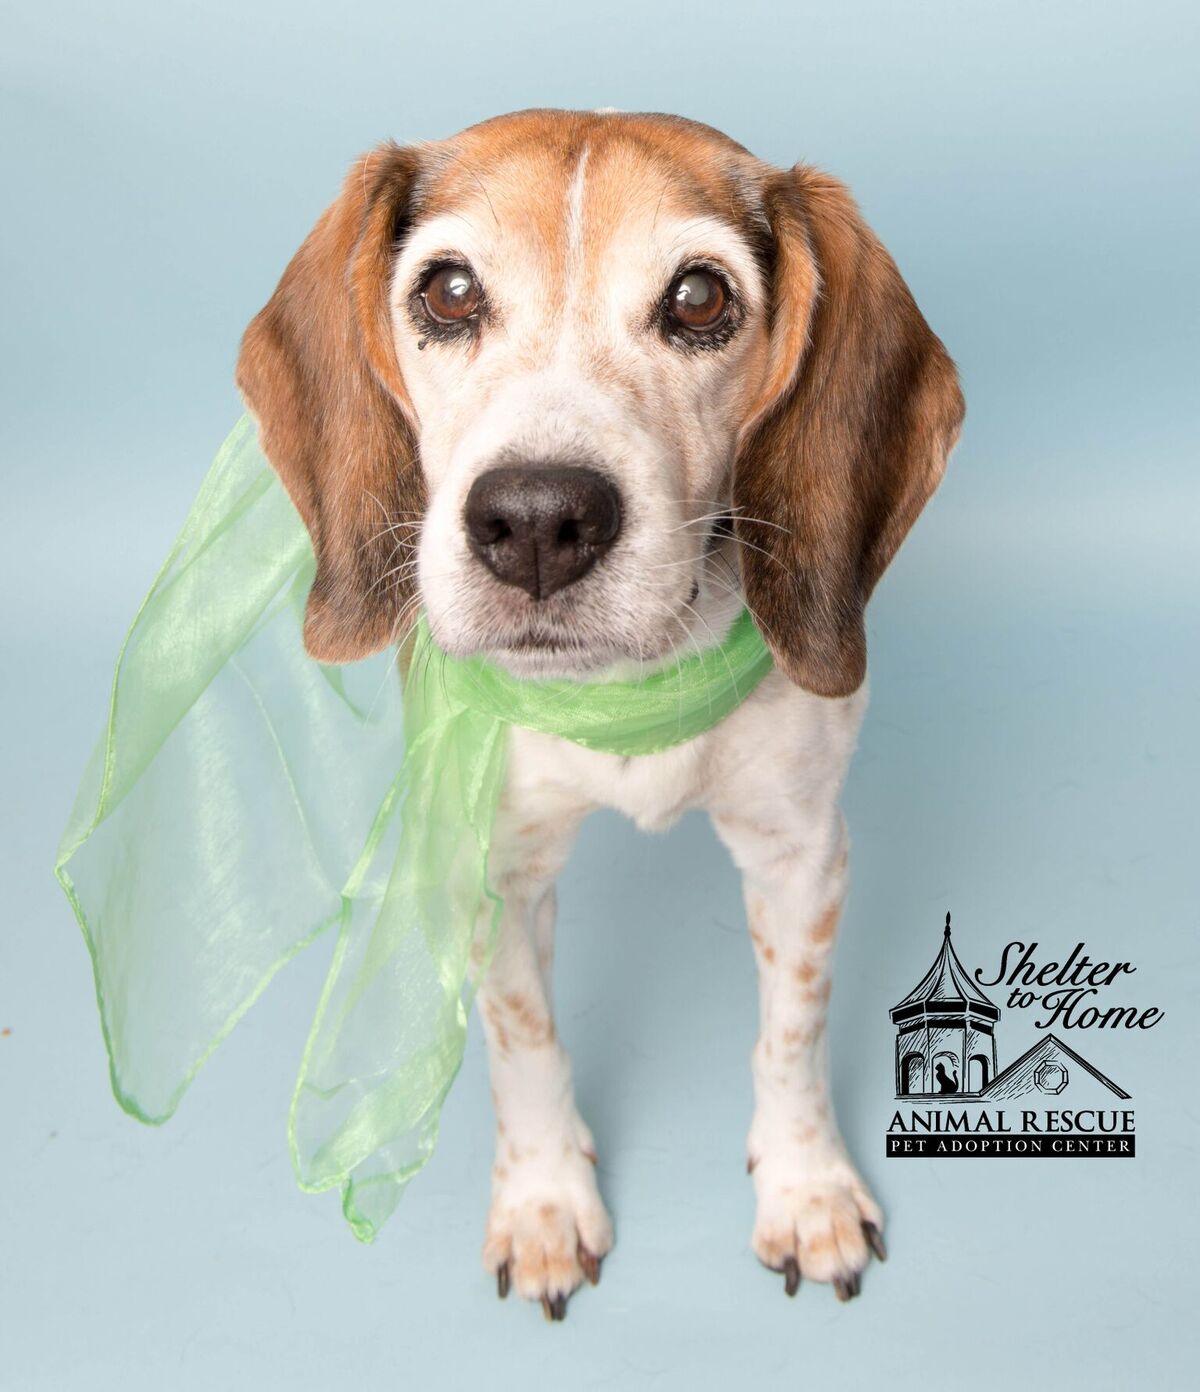 White and brown dog with green scarf standing in blue background